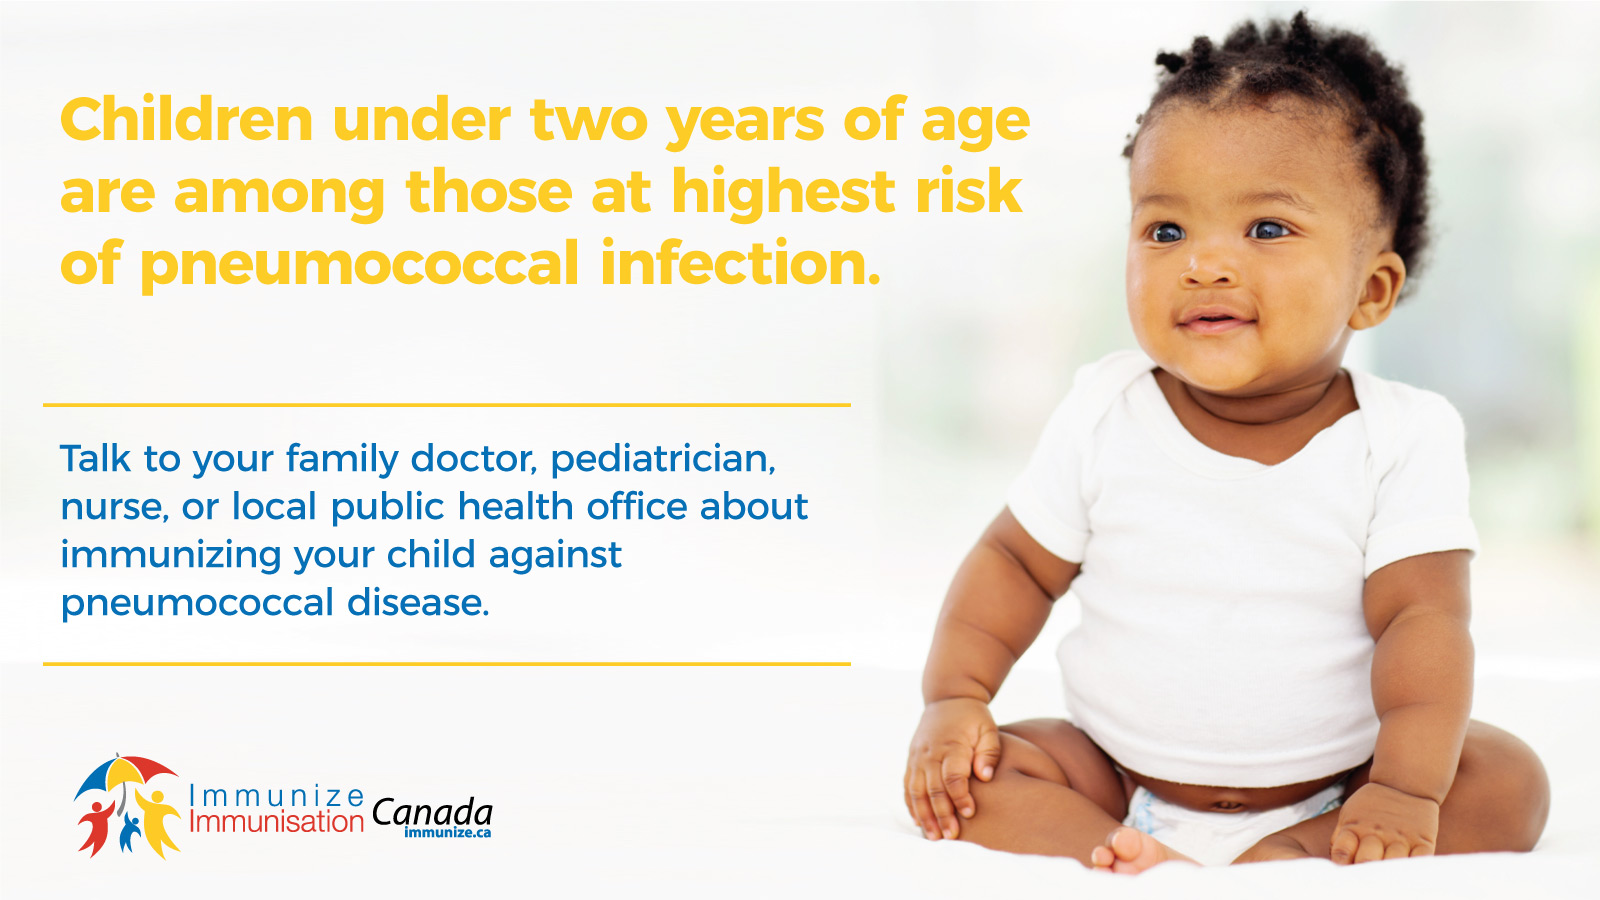 Children under two years of age are among those at highest risk of pneumococcal infection (Twitter)